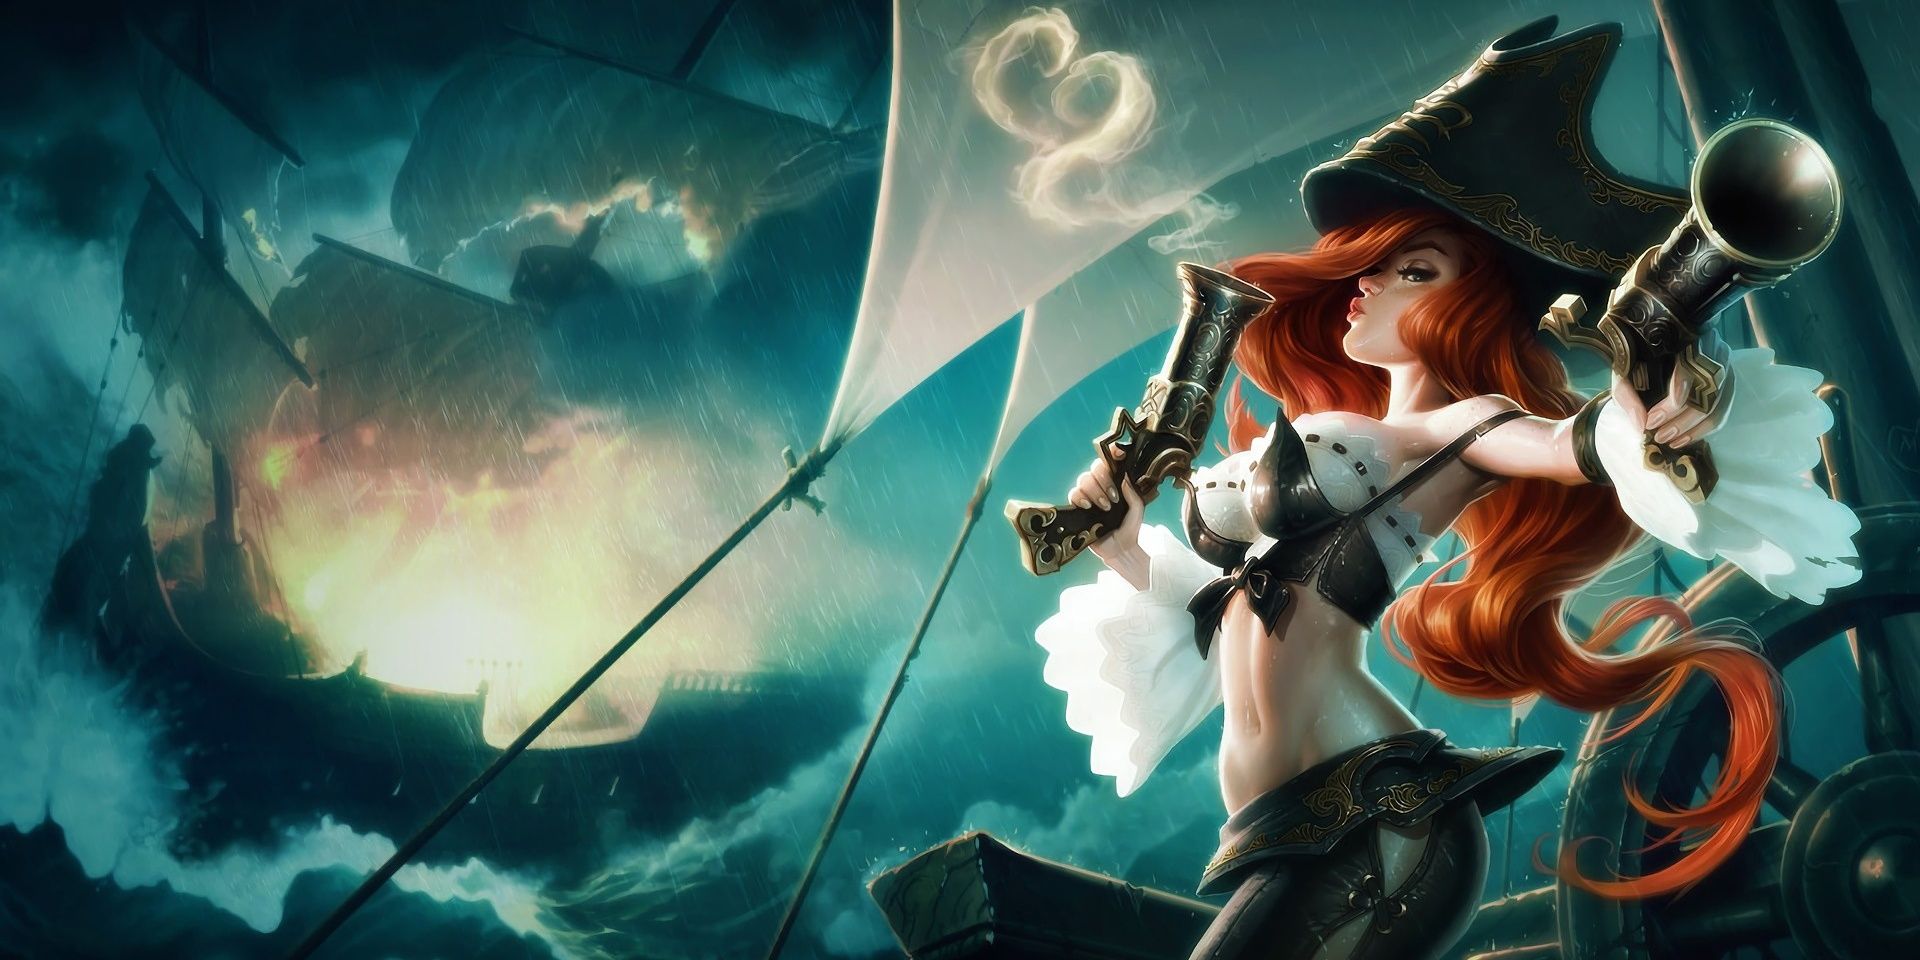 Miss Fortune Aiming Gun While Blowing Smoke From Secondary Gun